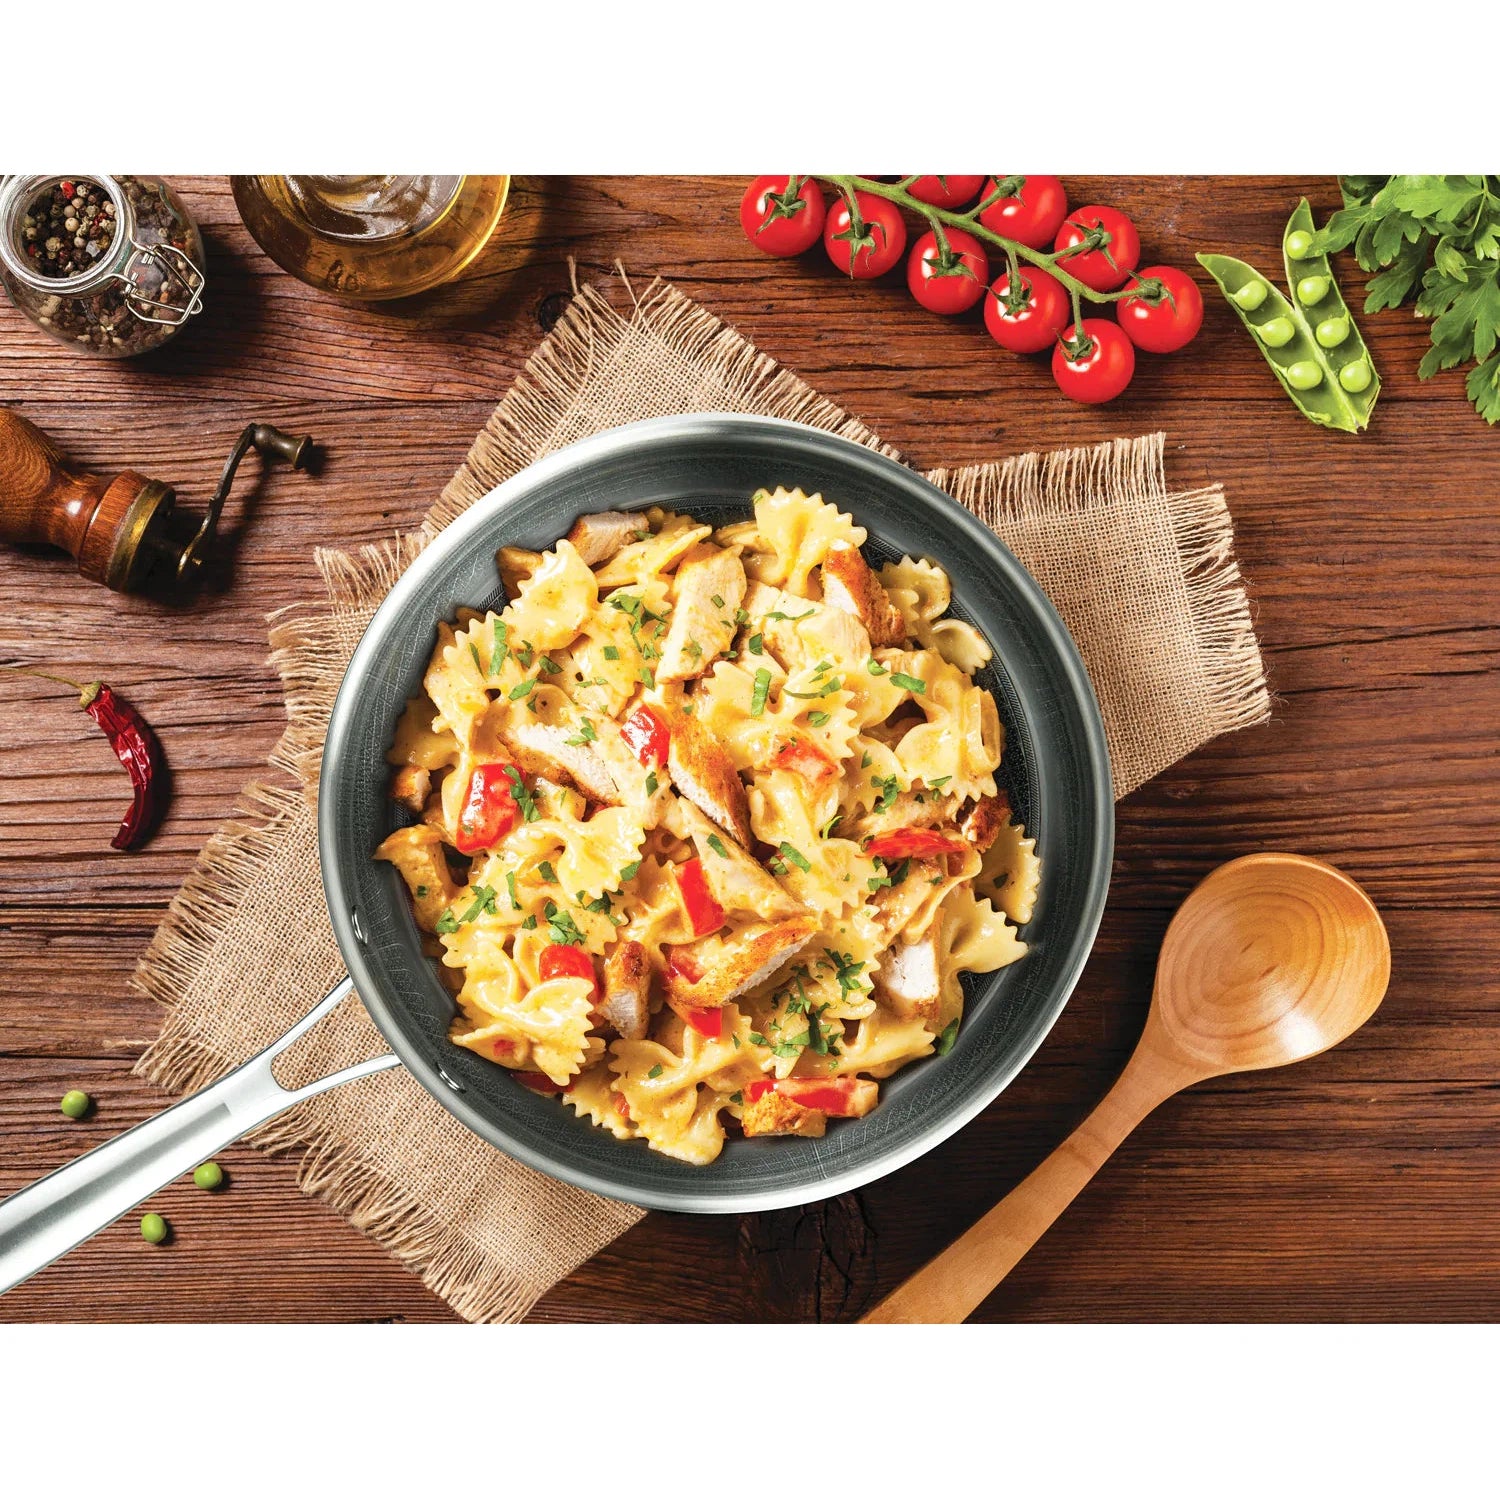 MASTERPAN Premium Series 9” 3-Ply Fry Pan and Skillet Stainless Steel and Aluminum Scratch-Resistant